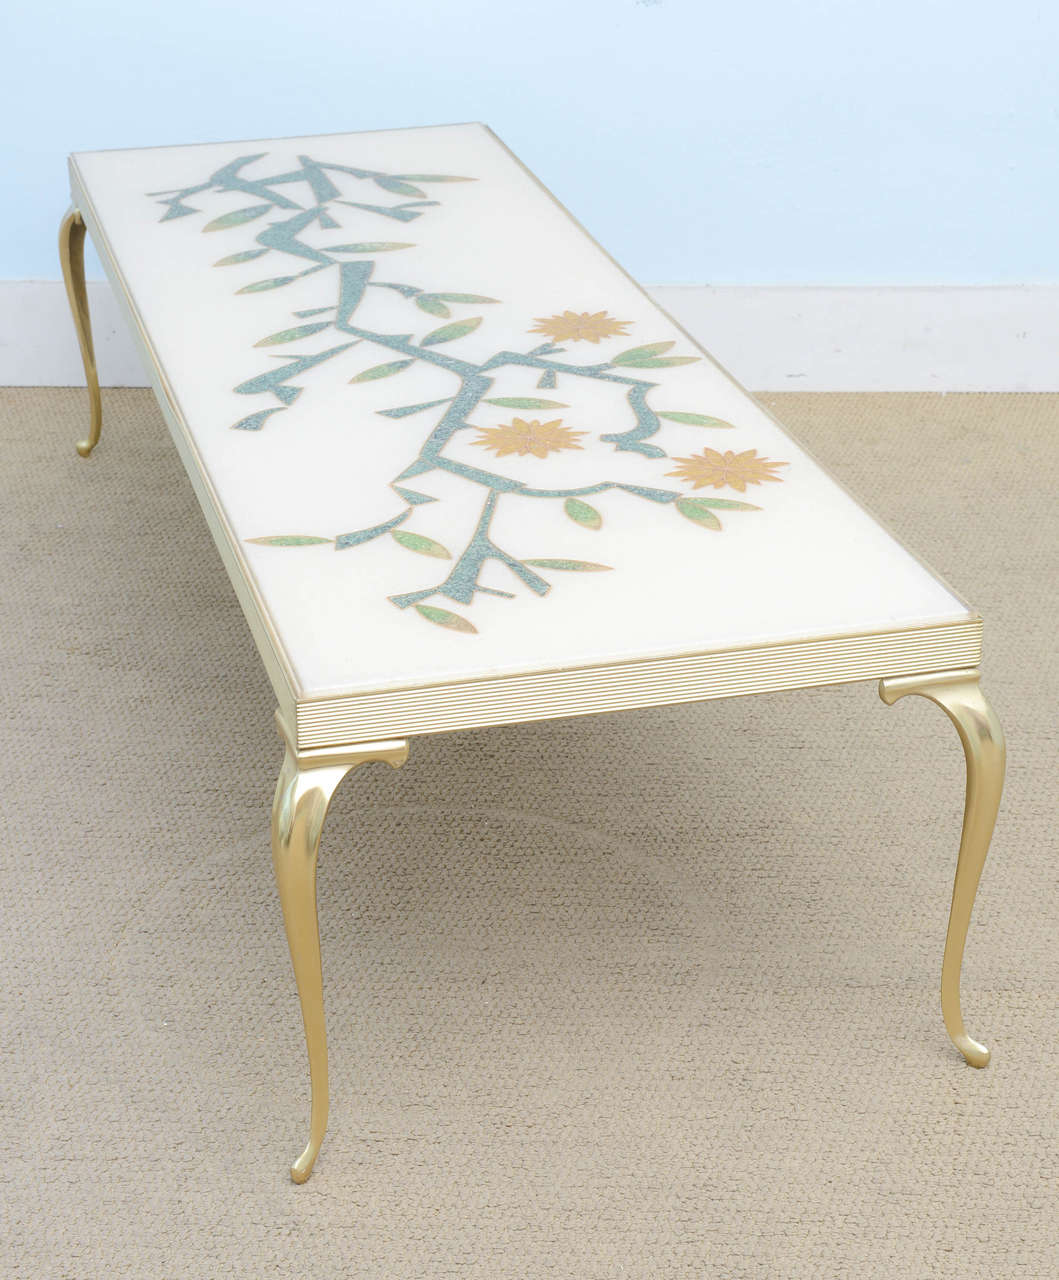 20th Century Mid Century Modern Hollywood Regency Continental Resin-Inlaid Coffee Table